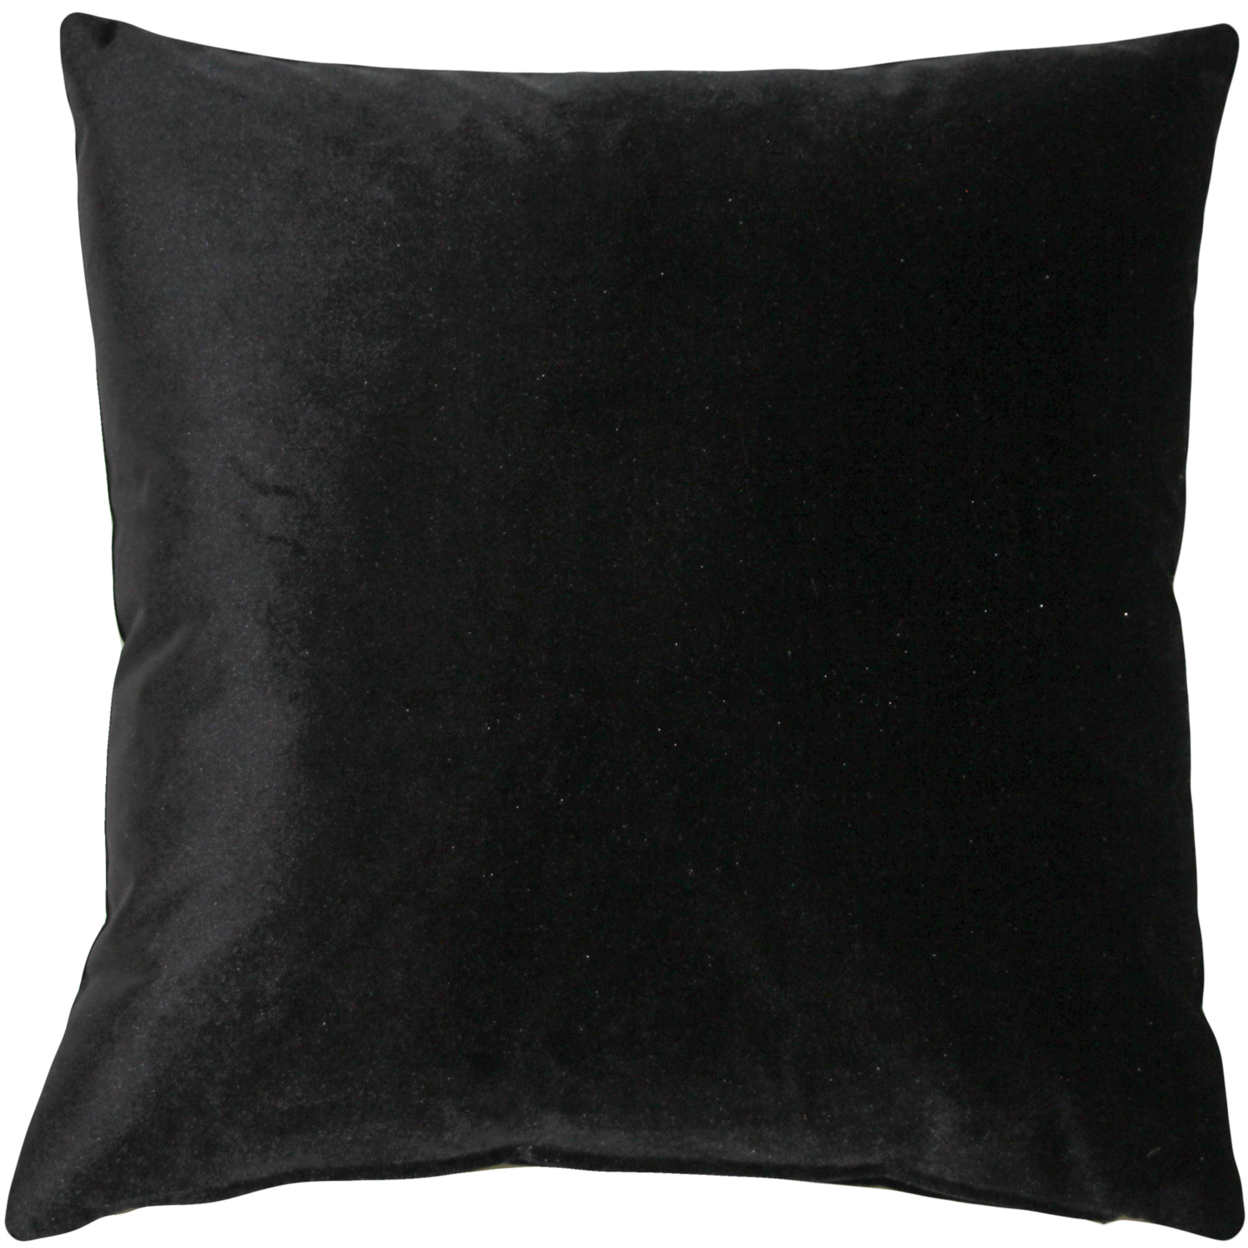 Castello Velvet Throw Pillows, Complete Pillow with Polyfill Pillow Insert (18 Colors, 3 Sizes) - black, 20x20